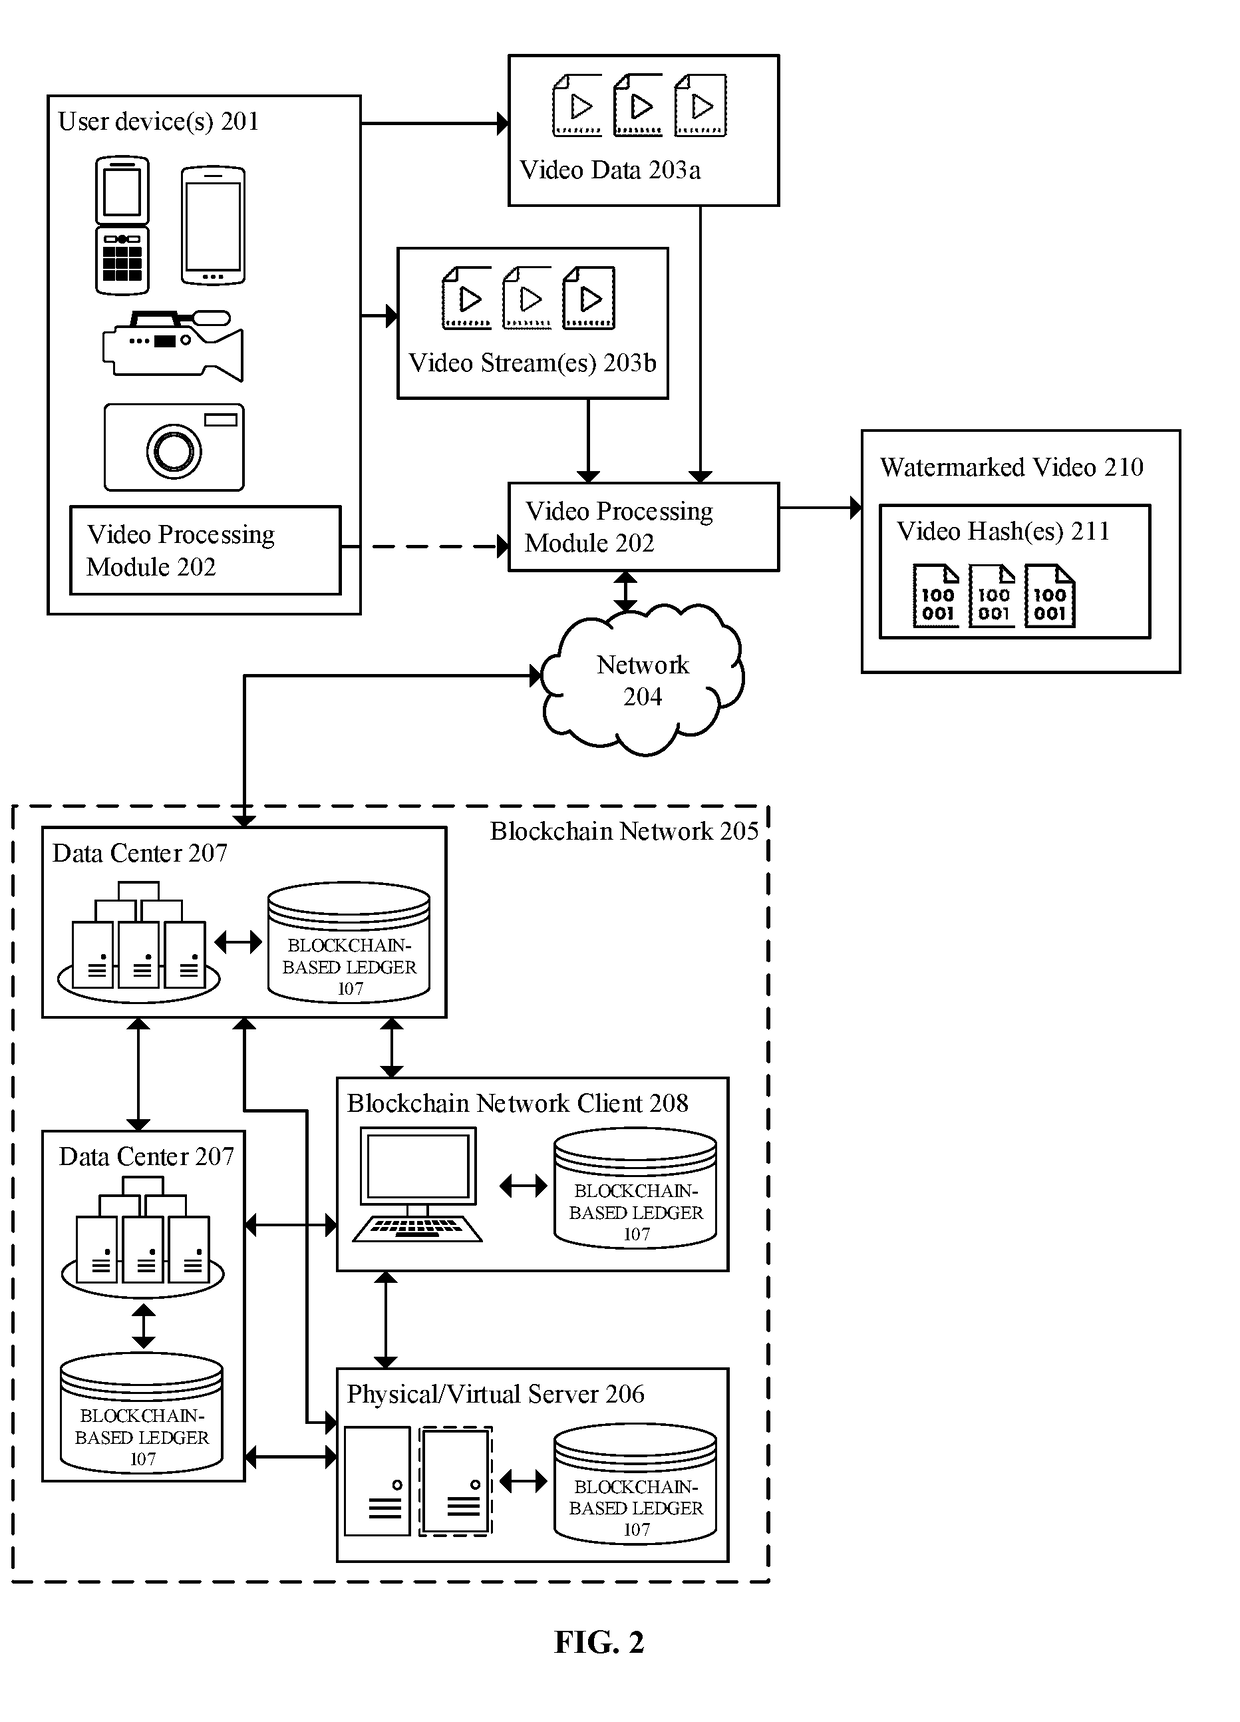 Systems and methods for authenticating video using watermarks